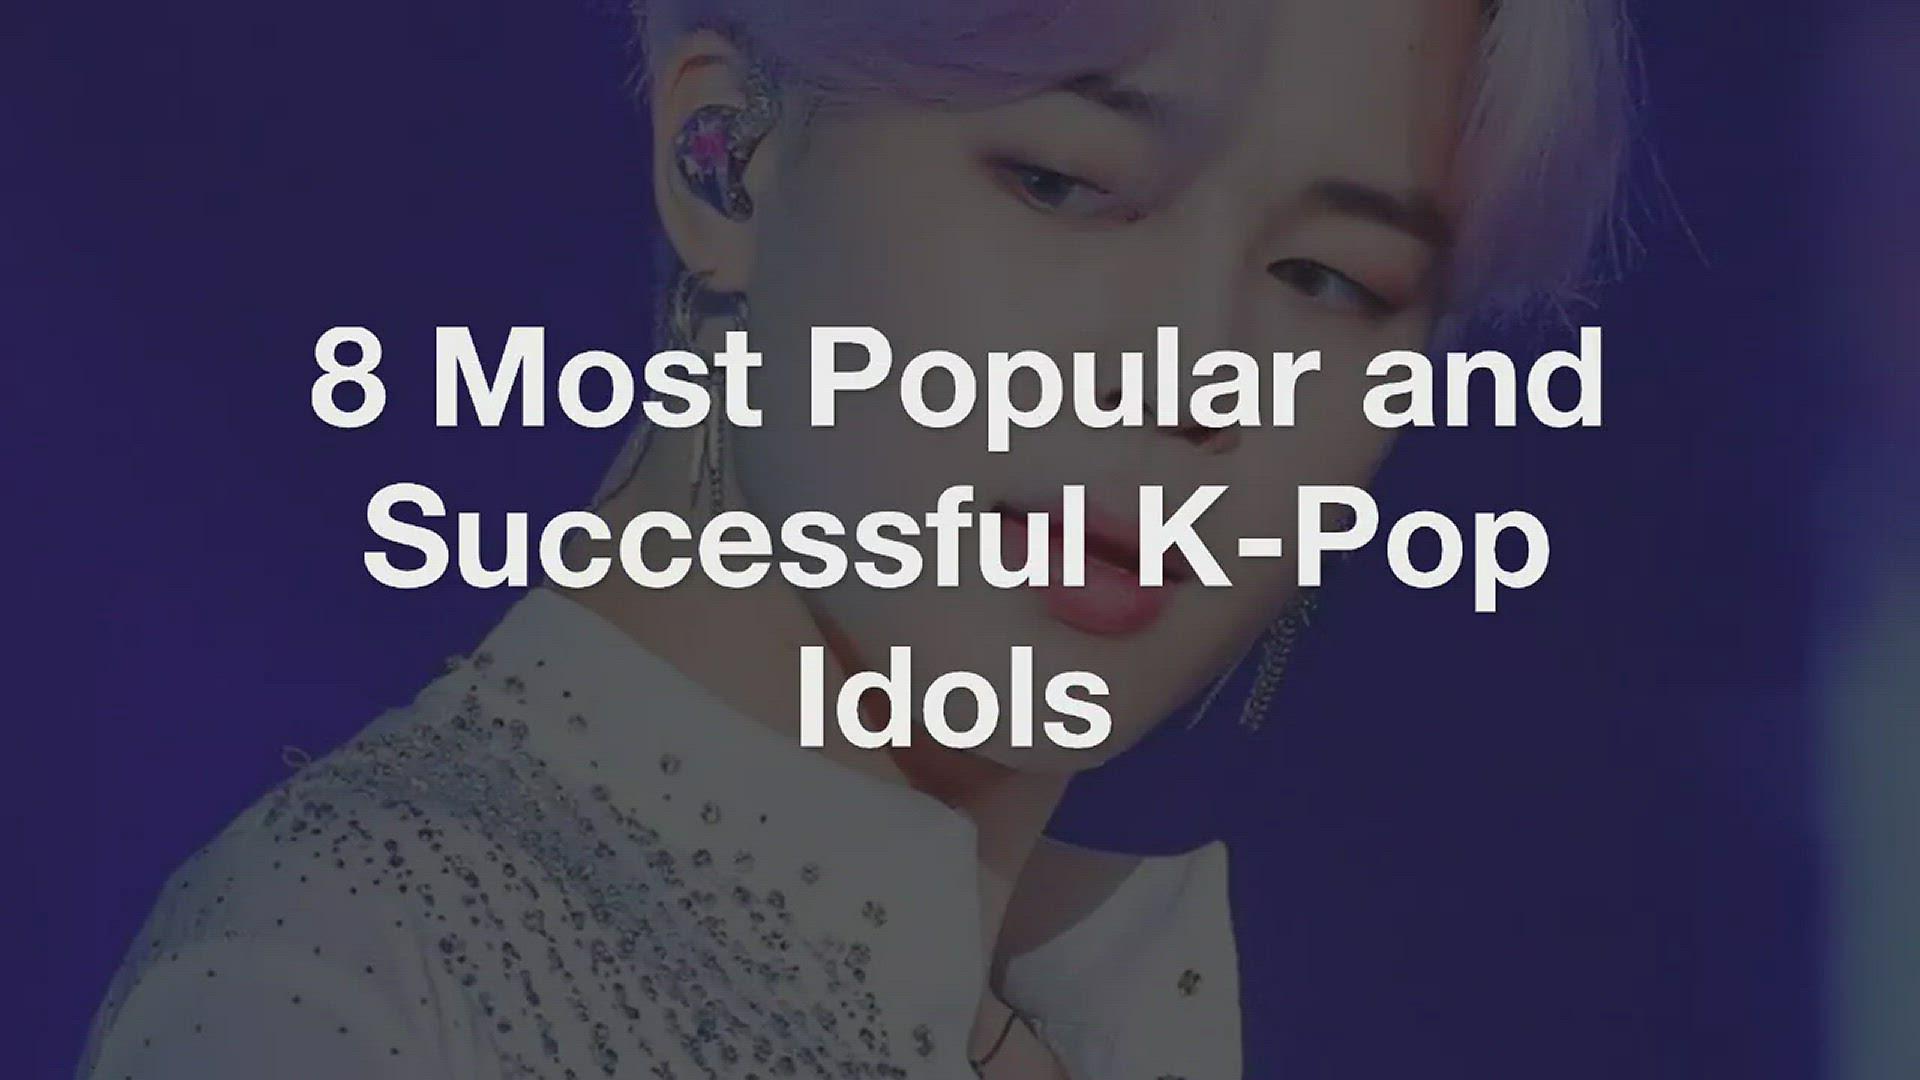 'Video thumbnail for 8 Most Popular and Successful K-Pop Idols'